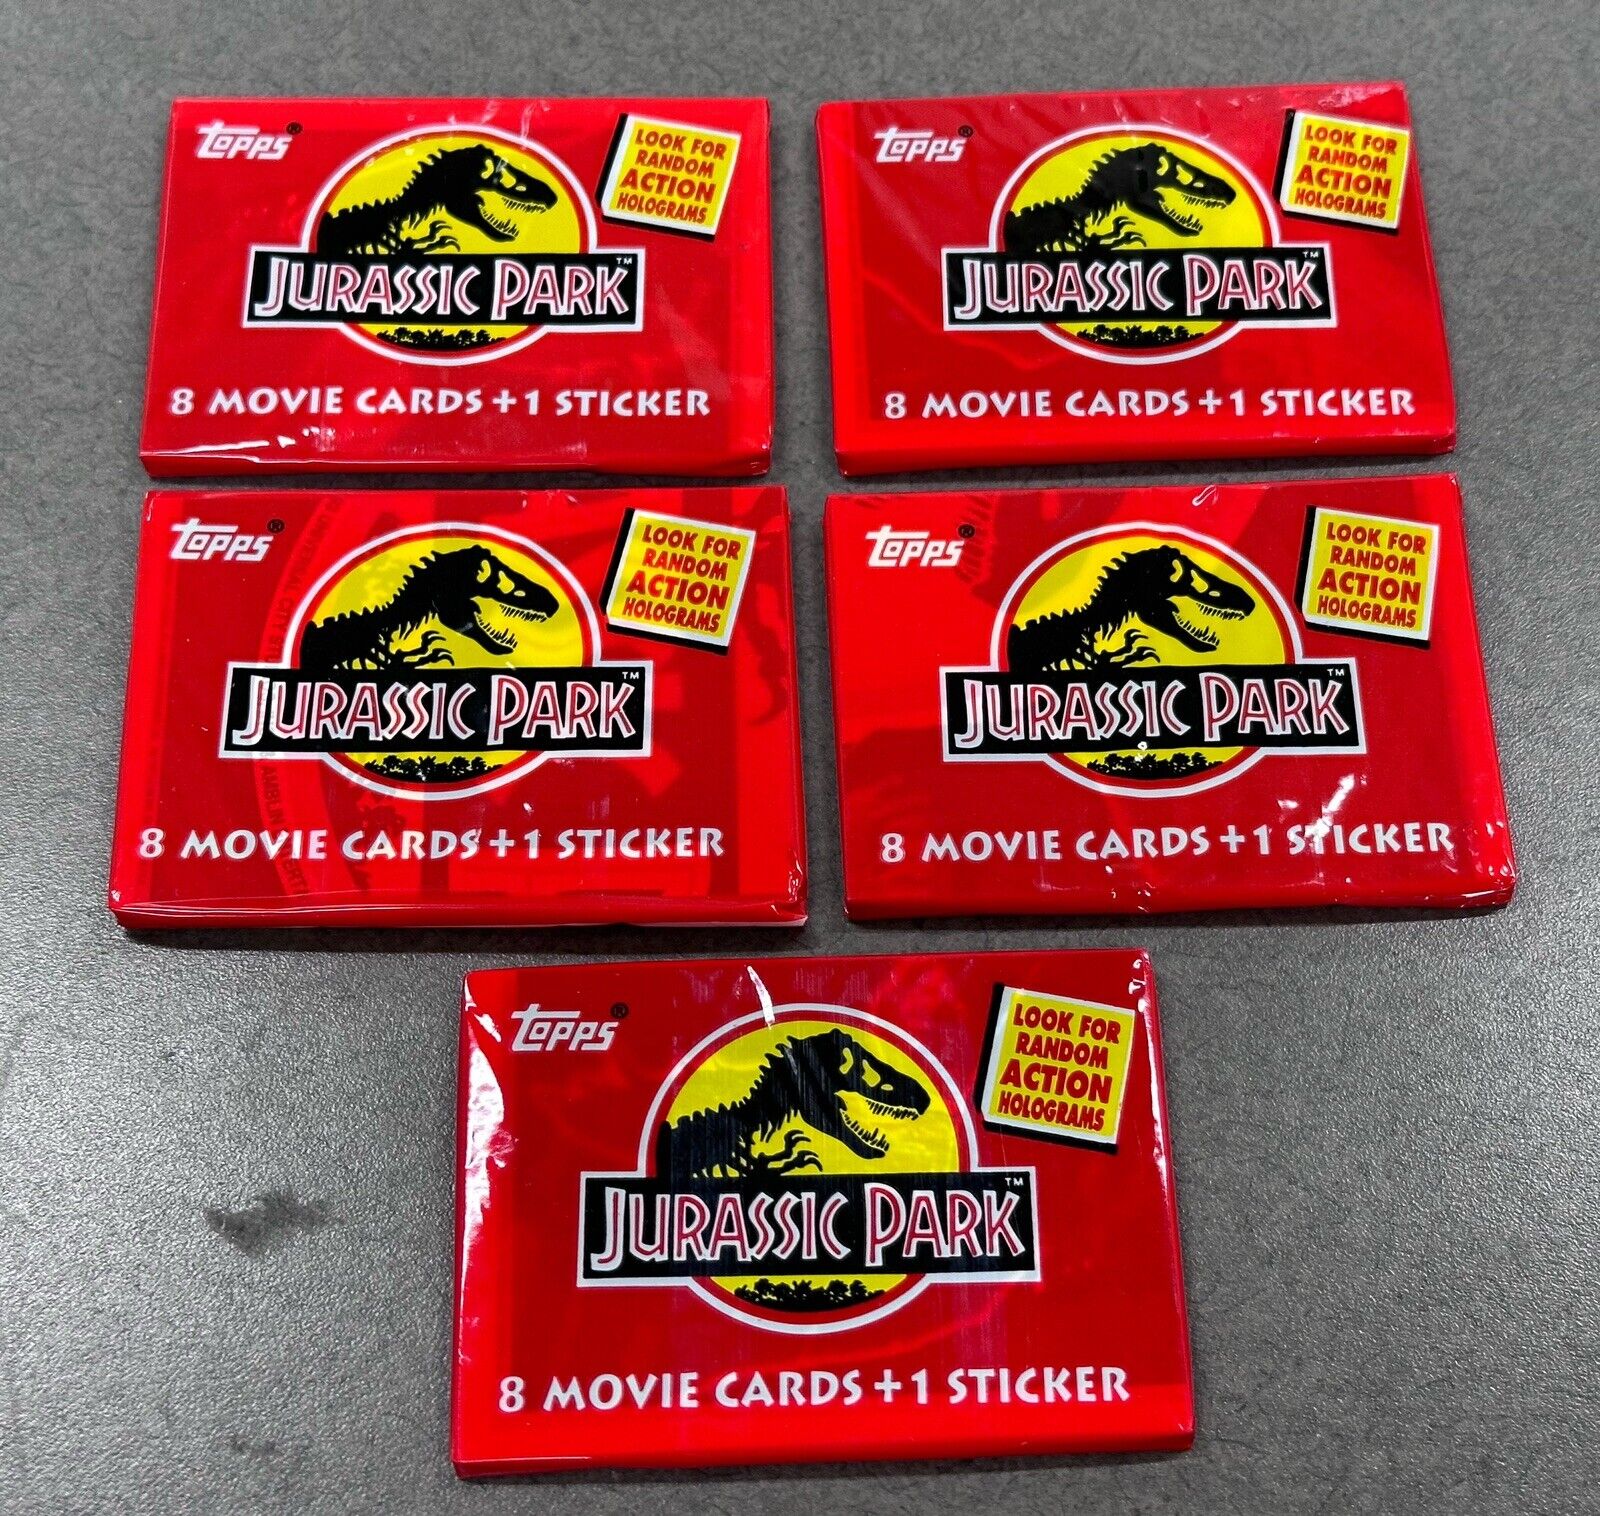 Retro 1992 Jurassic Park Trading Cards - Topps - Sealed Pack - 8 Cards 1 Sticker